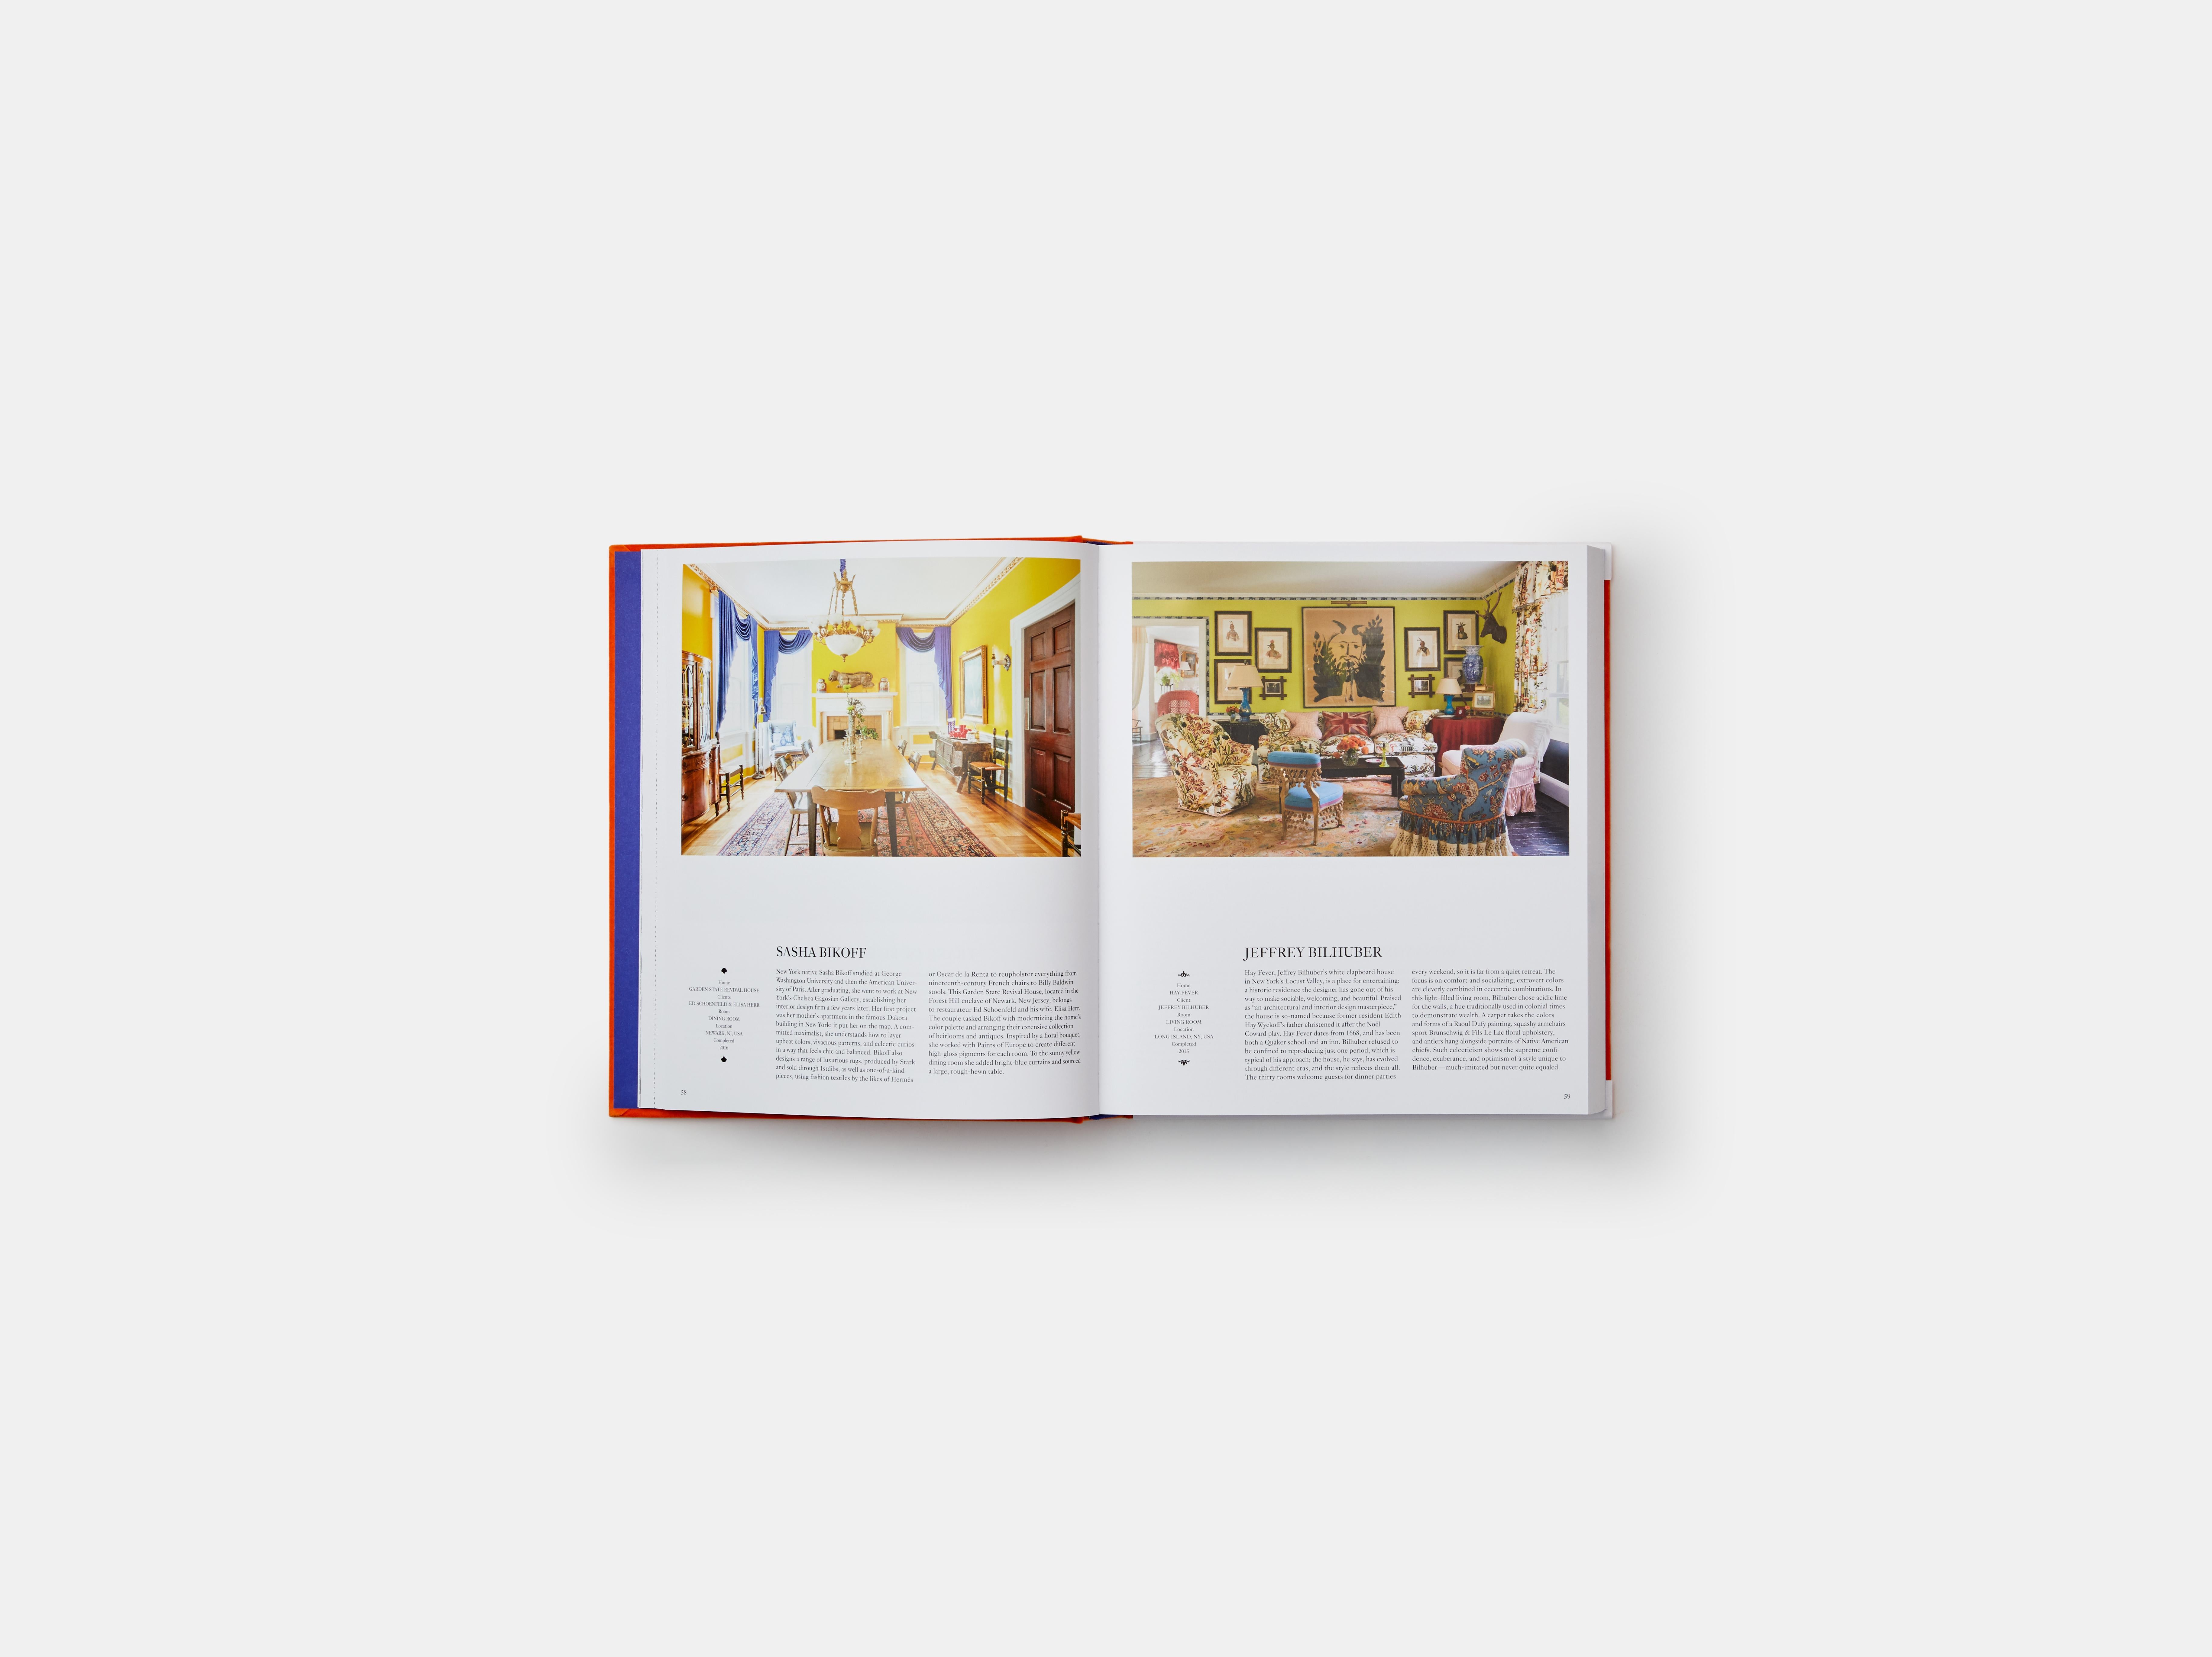 A stunning collection of the best living spaces in the world - available with a brand-new, vibrant-orange cover

Phaidon's best-selling Interiors: The Greatest Rooms of the Century is now available in a brand-new bright-orange velvet edition. This